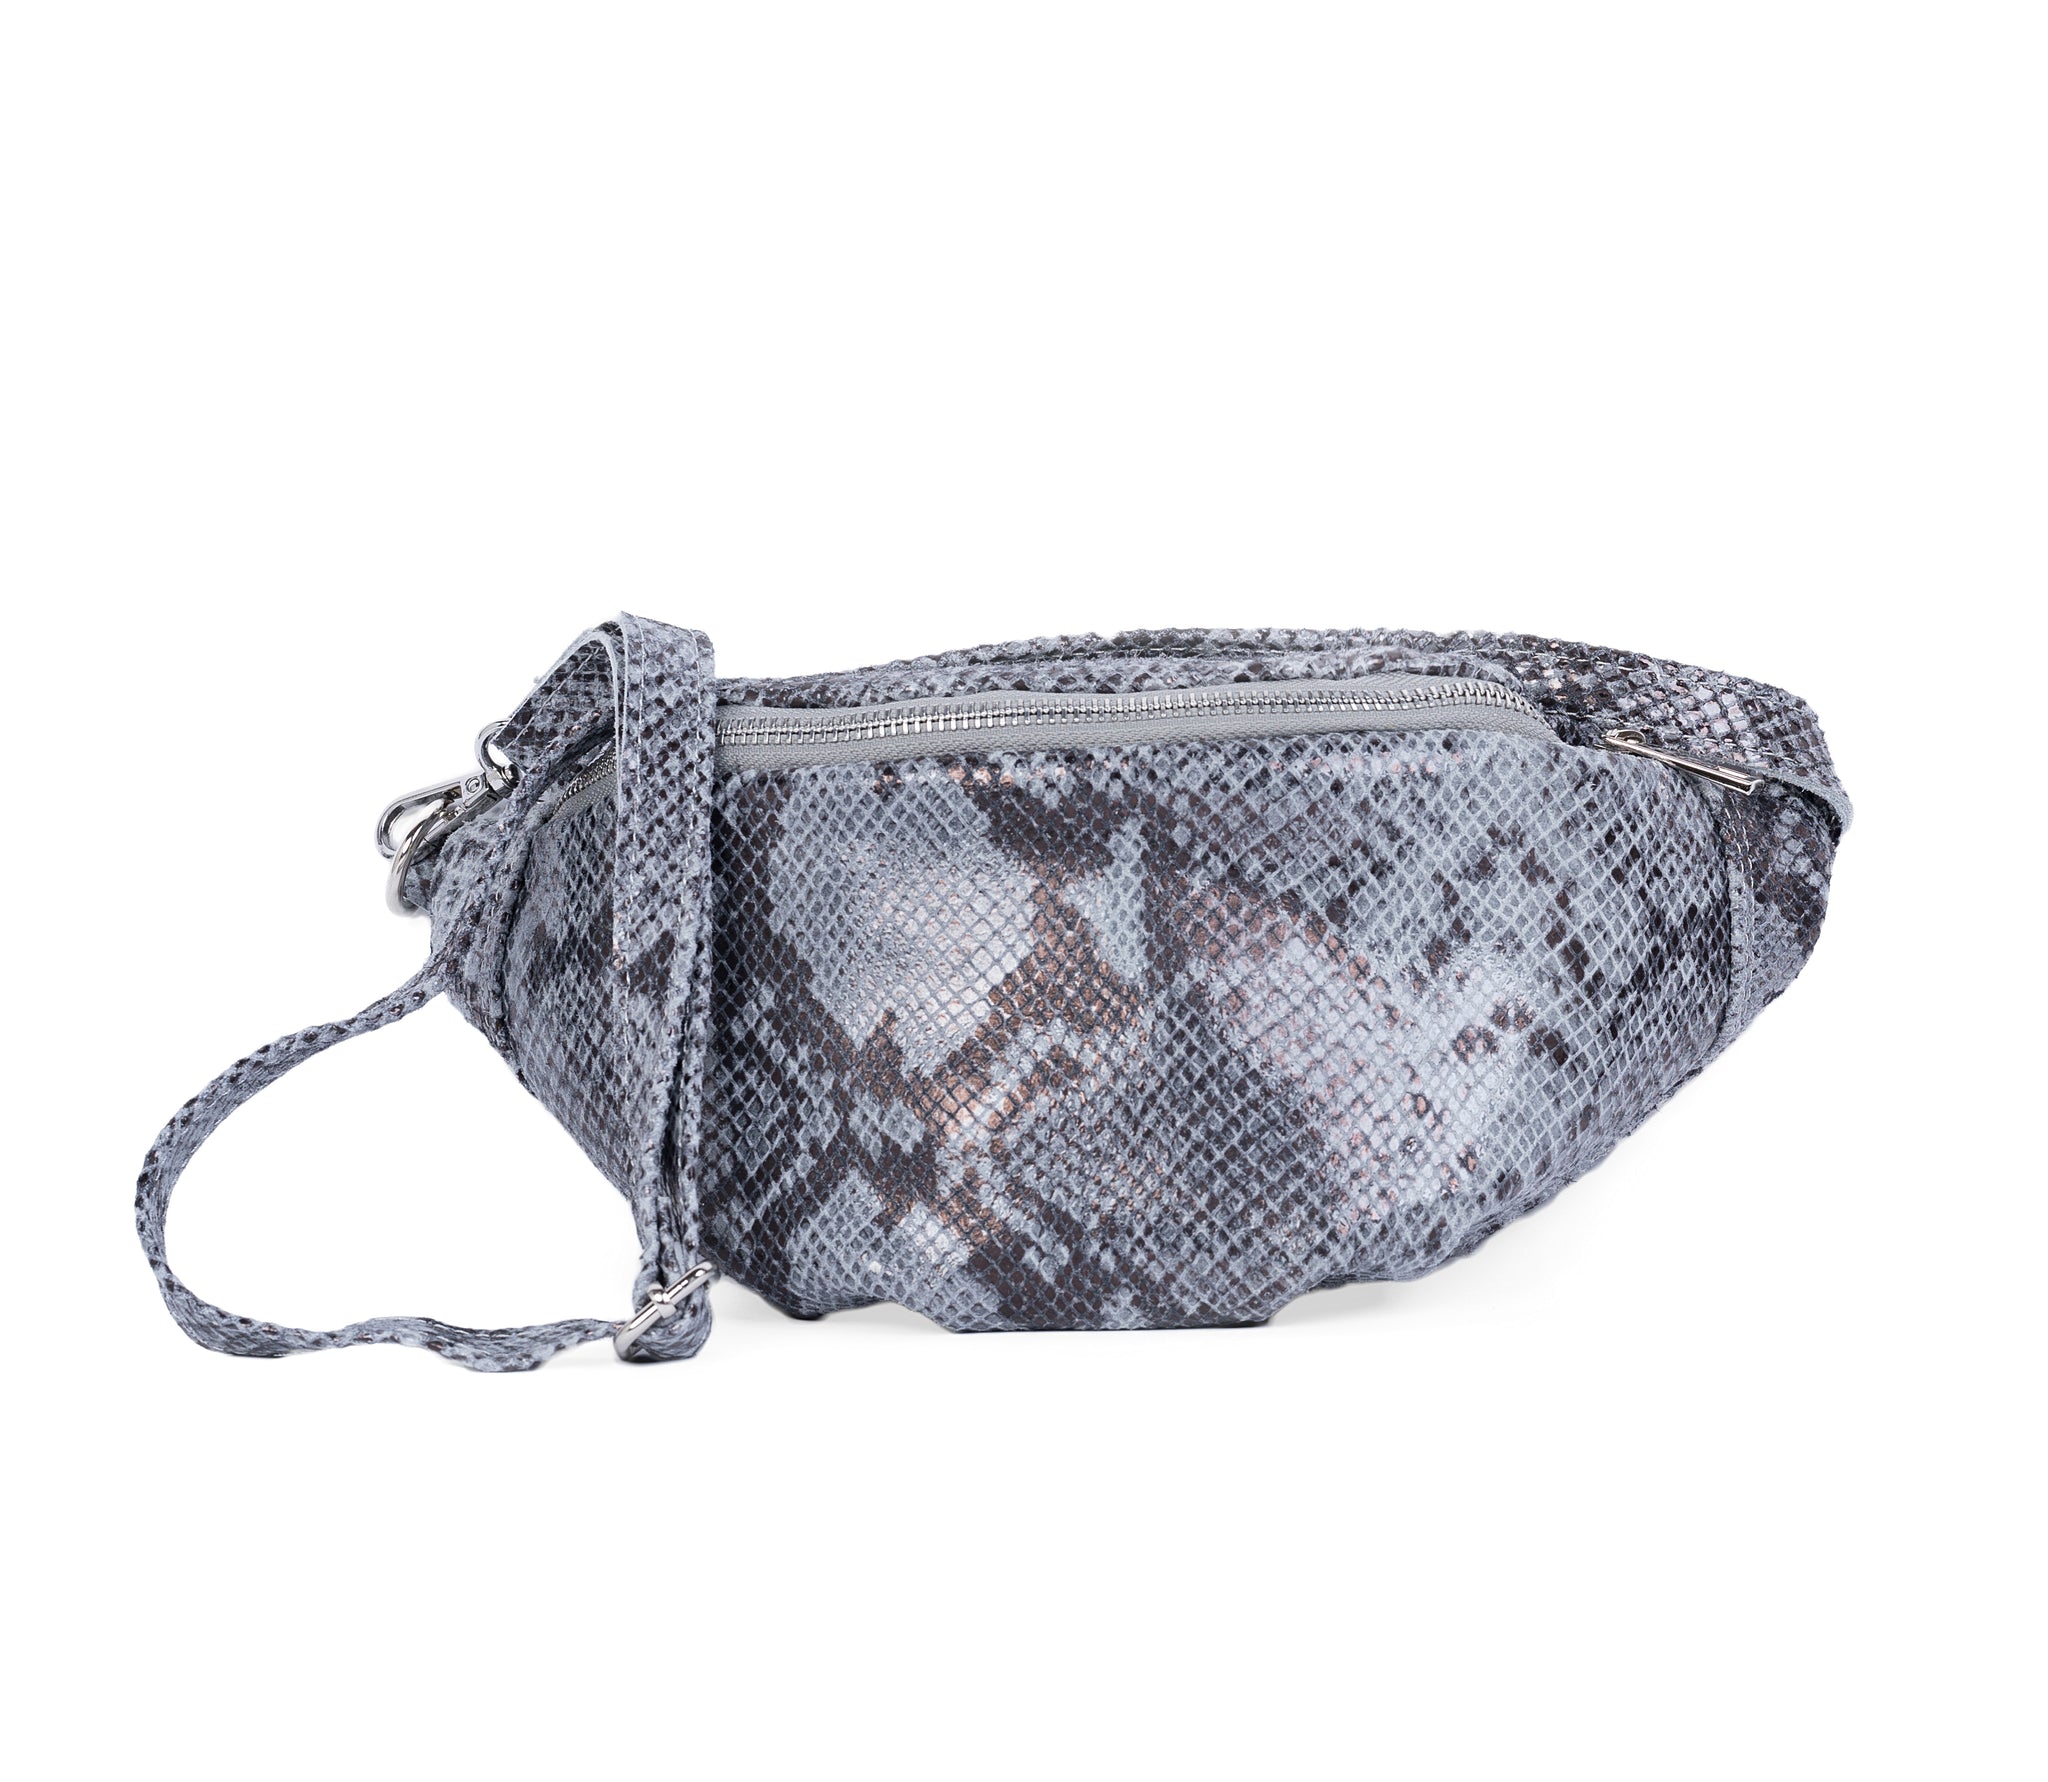 Elk jaar Immuniseren Brochure Snake Leather Print Fanny Pack/Belt Bag - Passione di gina/ Made With Love  In Italy